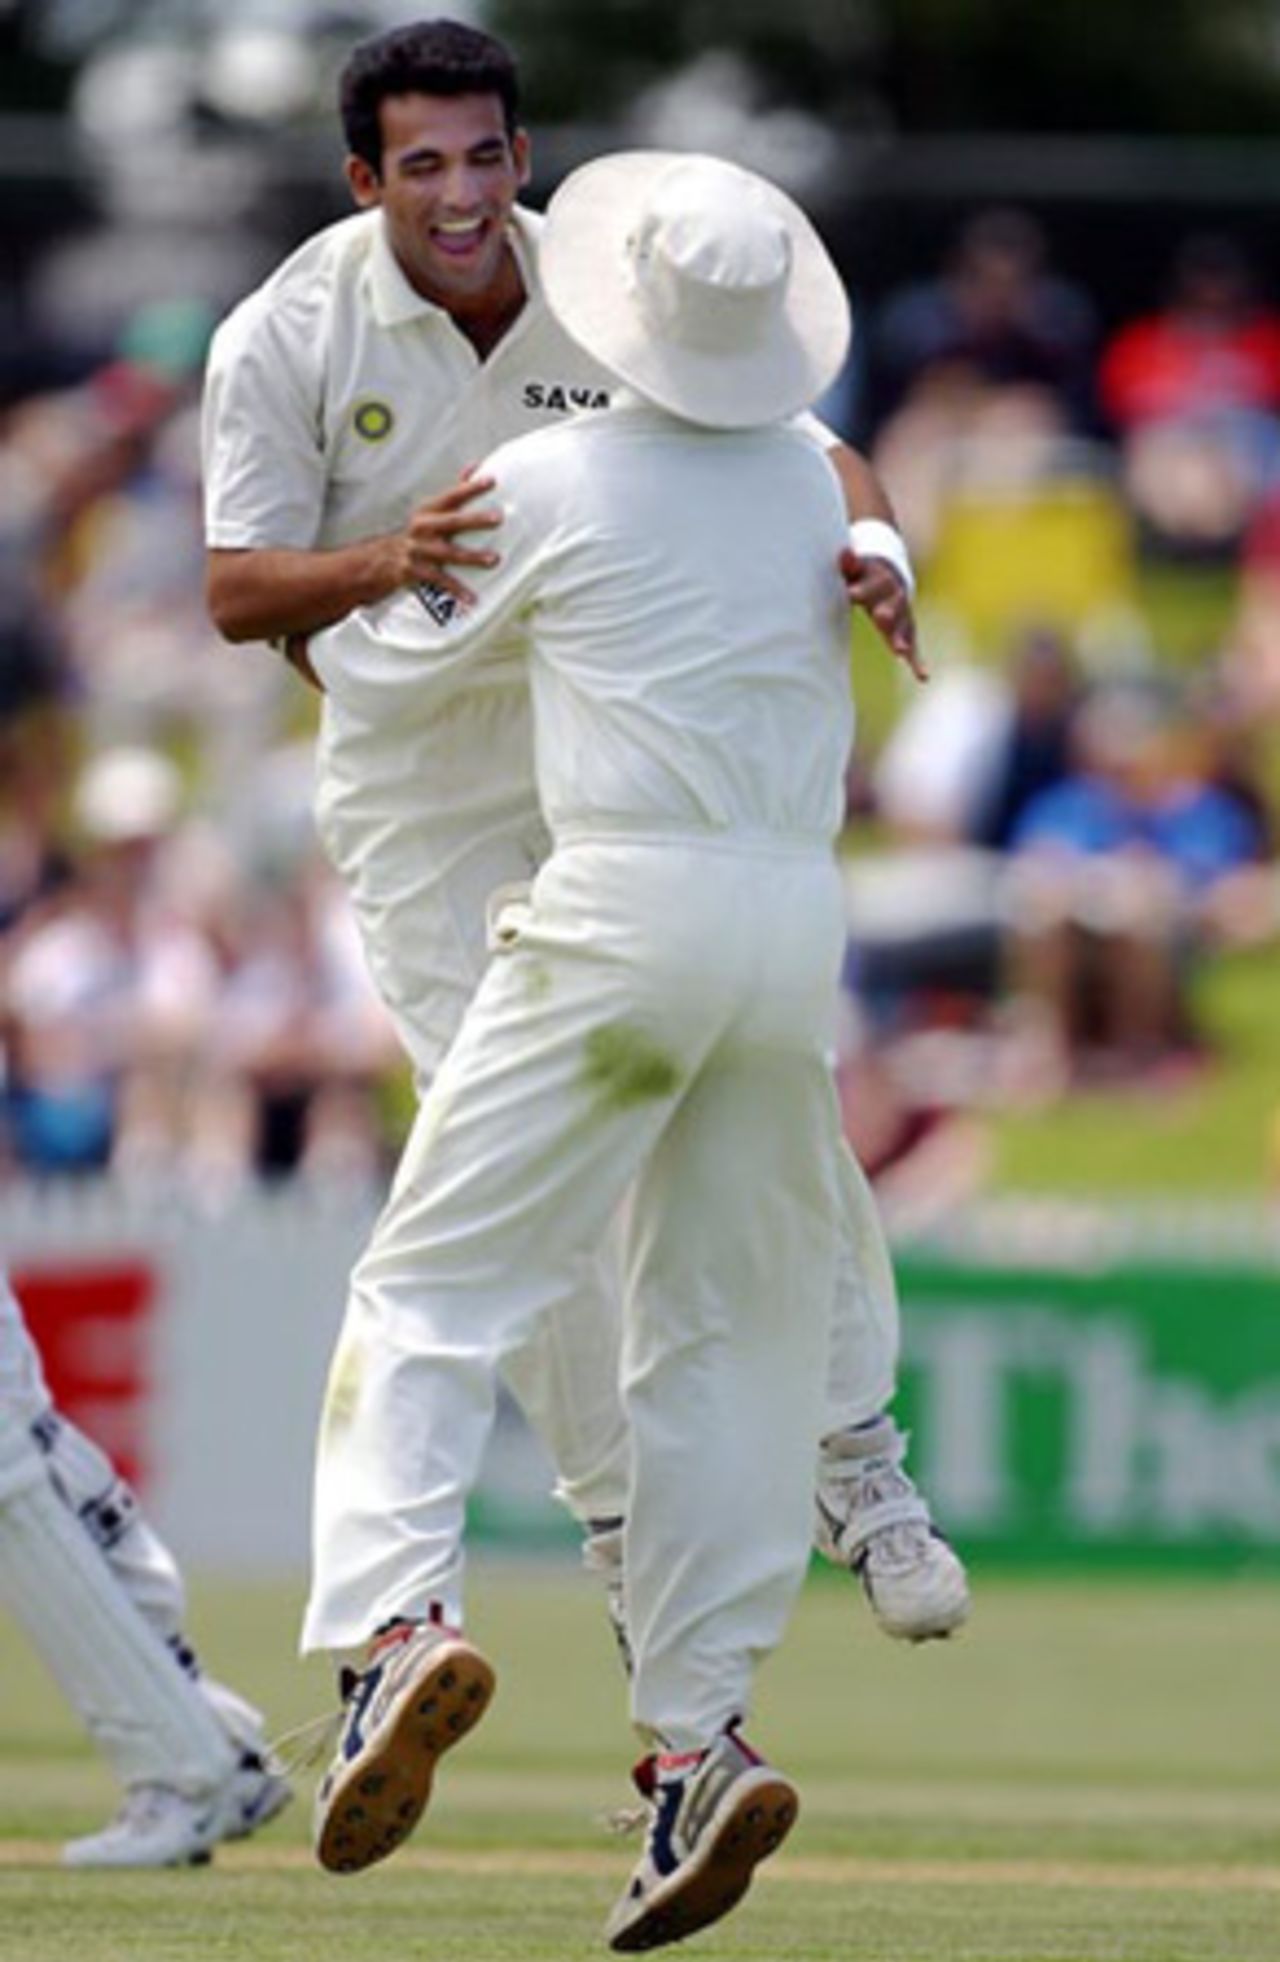 Indian bowler Zaheer Khan (left) and team-mate Harbhajan Singh celebrate the dismissal of New Zealand batsman Robbie Hart, lbw to Khan for three in his first innings. 2nd Test: New Zealand v India at Westpac Park, Hamilton, 19-23 December 2002 (21 December 2002).